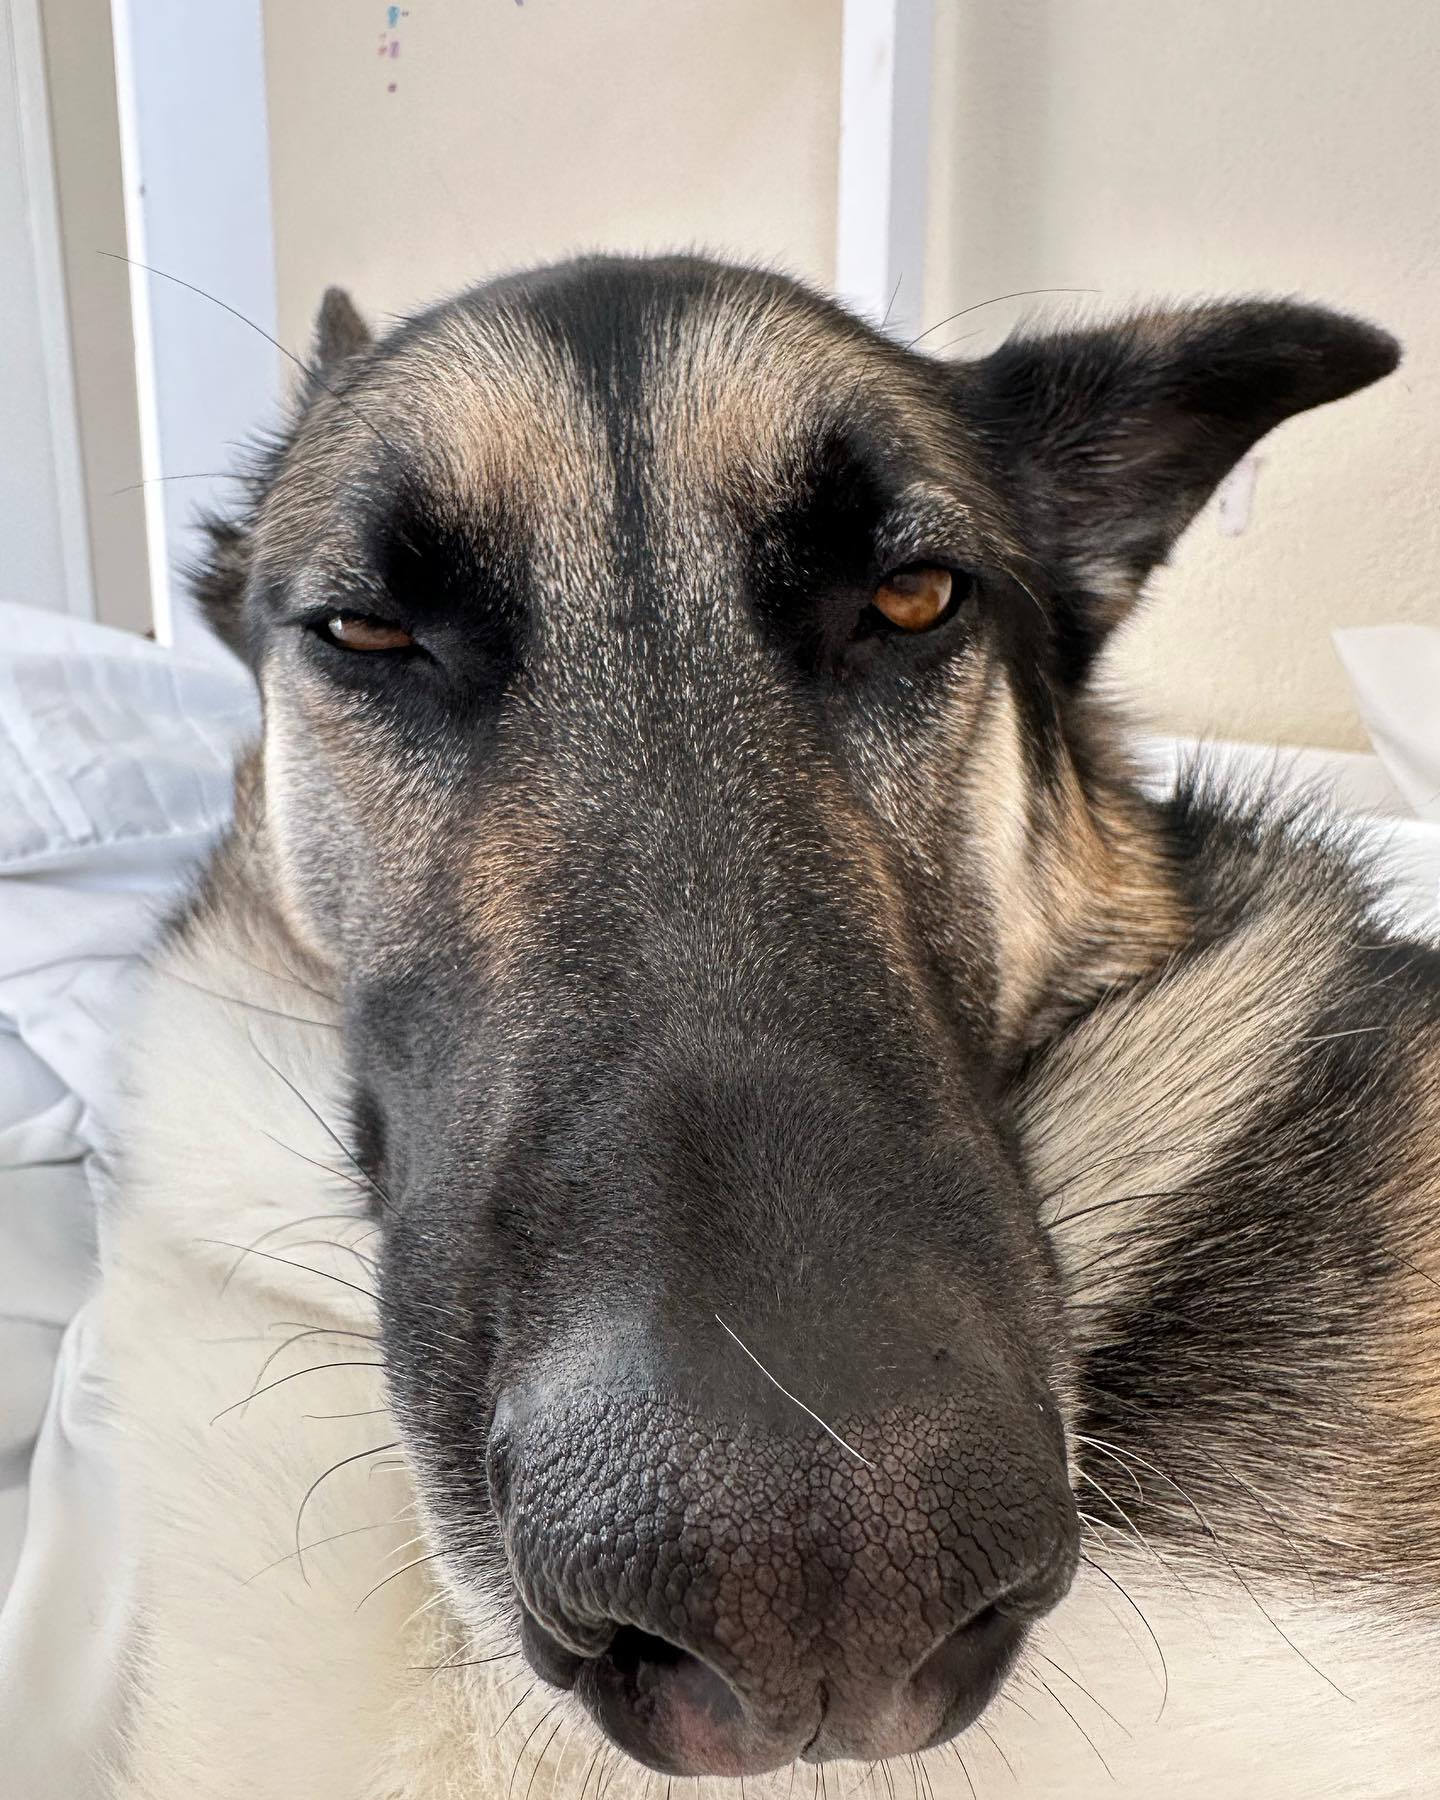 Dog appreciation post! BARKS all around for my doggo BMO. Pls tell her nice things in the comments 💕🐕 #woof #dogs #dogsofinstagram #germanshepherd #dogmom